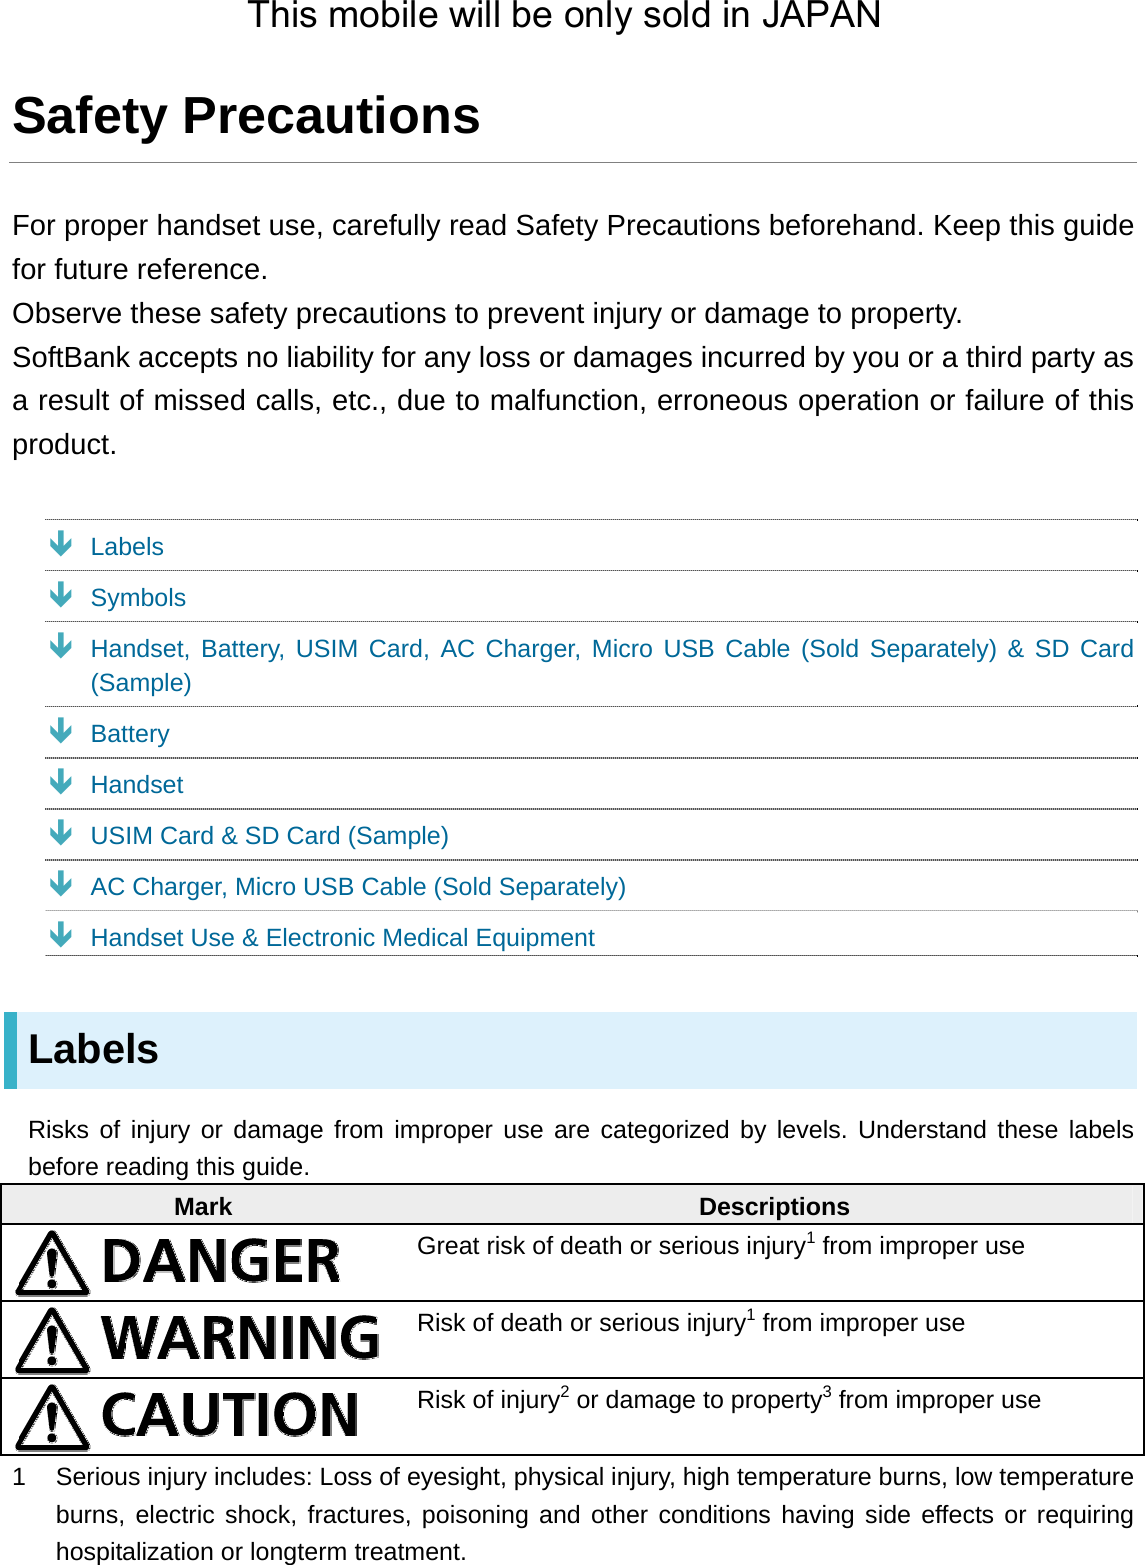 Safety Precautions For proper handset use, carefully read Safety Precautions beforehand. Keep this guide for future reference. Observe these safety precautions to prevent injury or damage to property. SoftBank accepts no liability for any loss or damages incurred by you or a third party as a result of missed calls, etc., due to malfunction, erroneous operation or failure of this product.  Labels  Symbols  Handset, Battery, USIM Card, AC Charger, Micro USB Cable (Sold Separately) &amp; SD Card (Sample)  Battery  Handset  USIM Card &amp; SD Card (Sample)  AC Charger, Micro USB Cable (Sold Separately)  Handset Use &amp; Electronic Medical Equipment Labels Risks of injury or damage from improper use are categorized by levels. Understand these labels before reading this guide. Mark  Descriptions  Great risk of death or serious injury1 from improper use  Risk of death or serious injury1 from improper use  Risk of injury2 or damage to property3 from improper use 1  Serious injury includes: Loss of eyesight, physical injury, high temperature burns, low temperature burns, electric shock, fractures, poisoning and other conditions having side effects or requiring hospitalization or longterm treatment. This mobile will be only sold in JAPAN